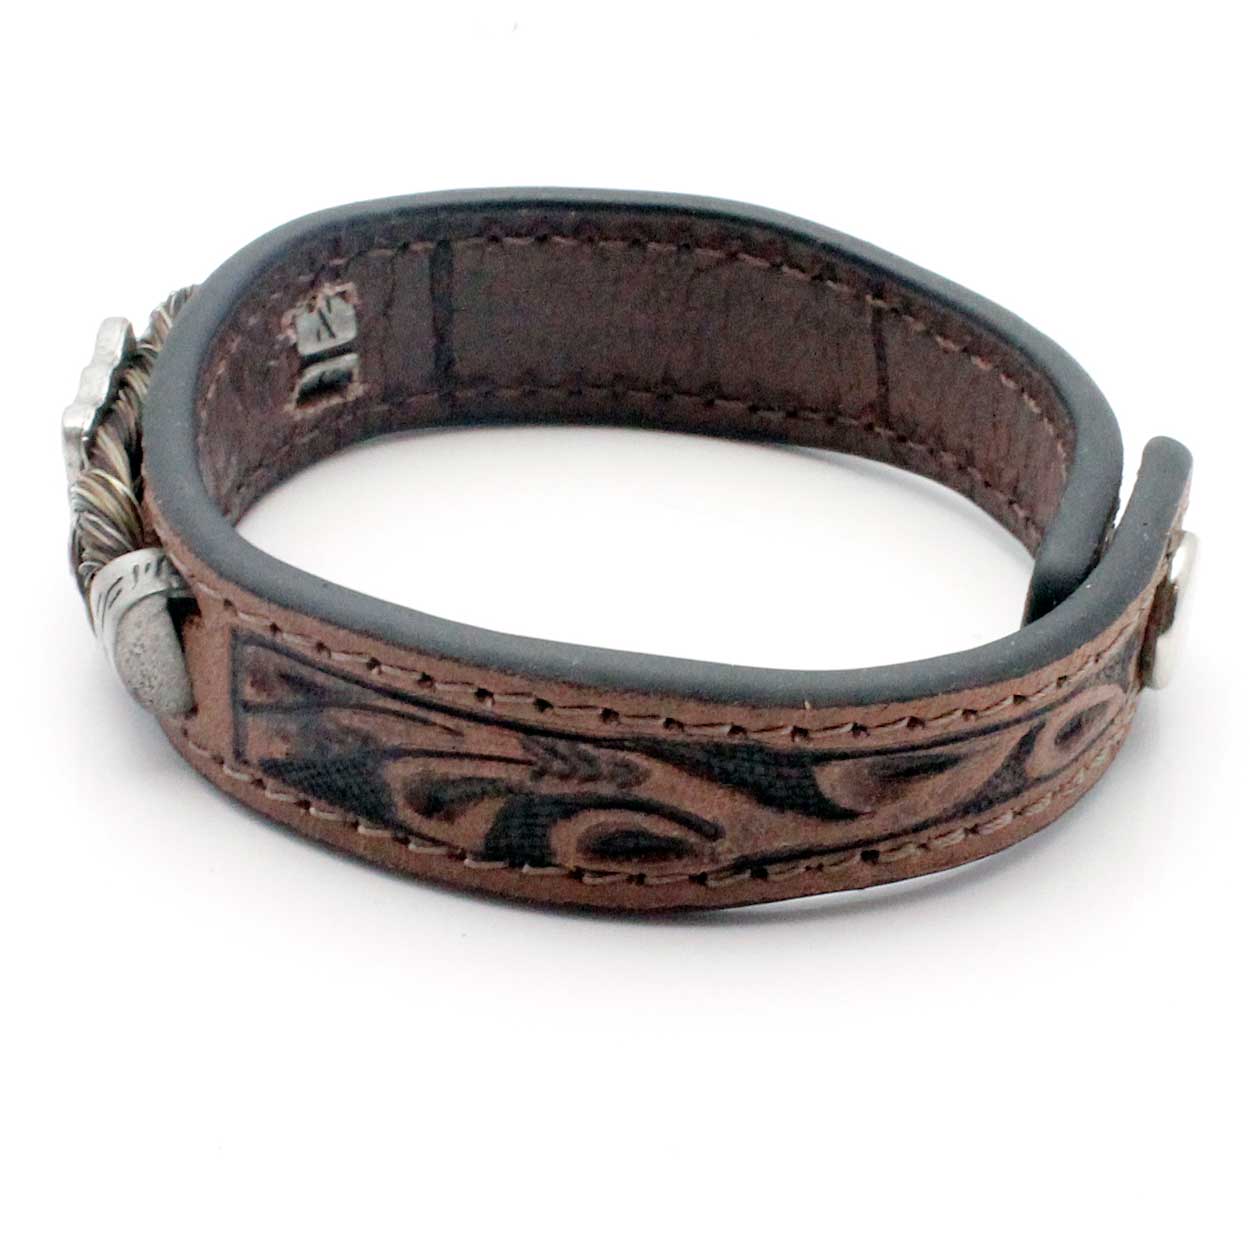 Stamped Leather & Black Horse Hair Bracelet With Metal Accents - Pink